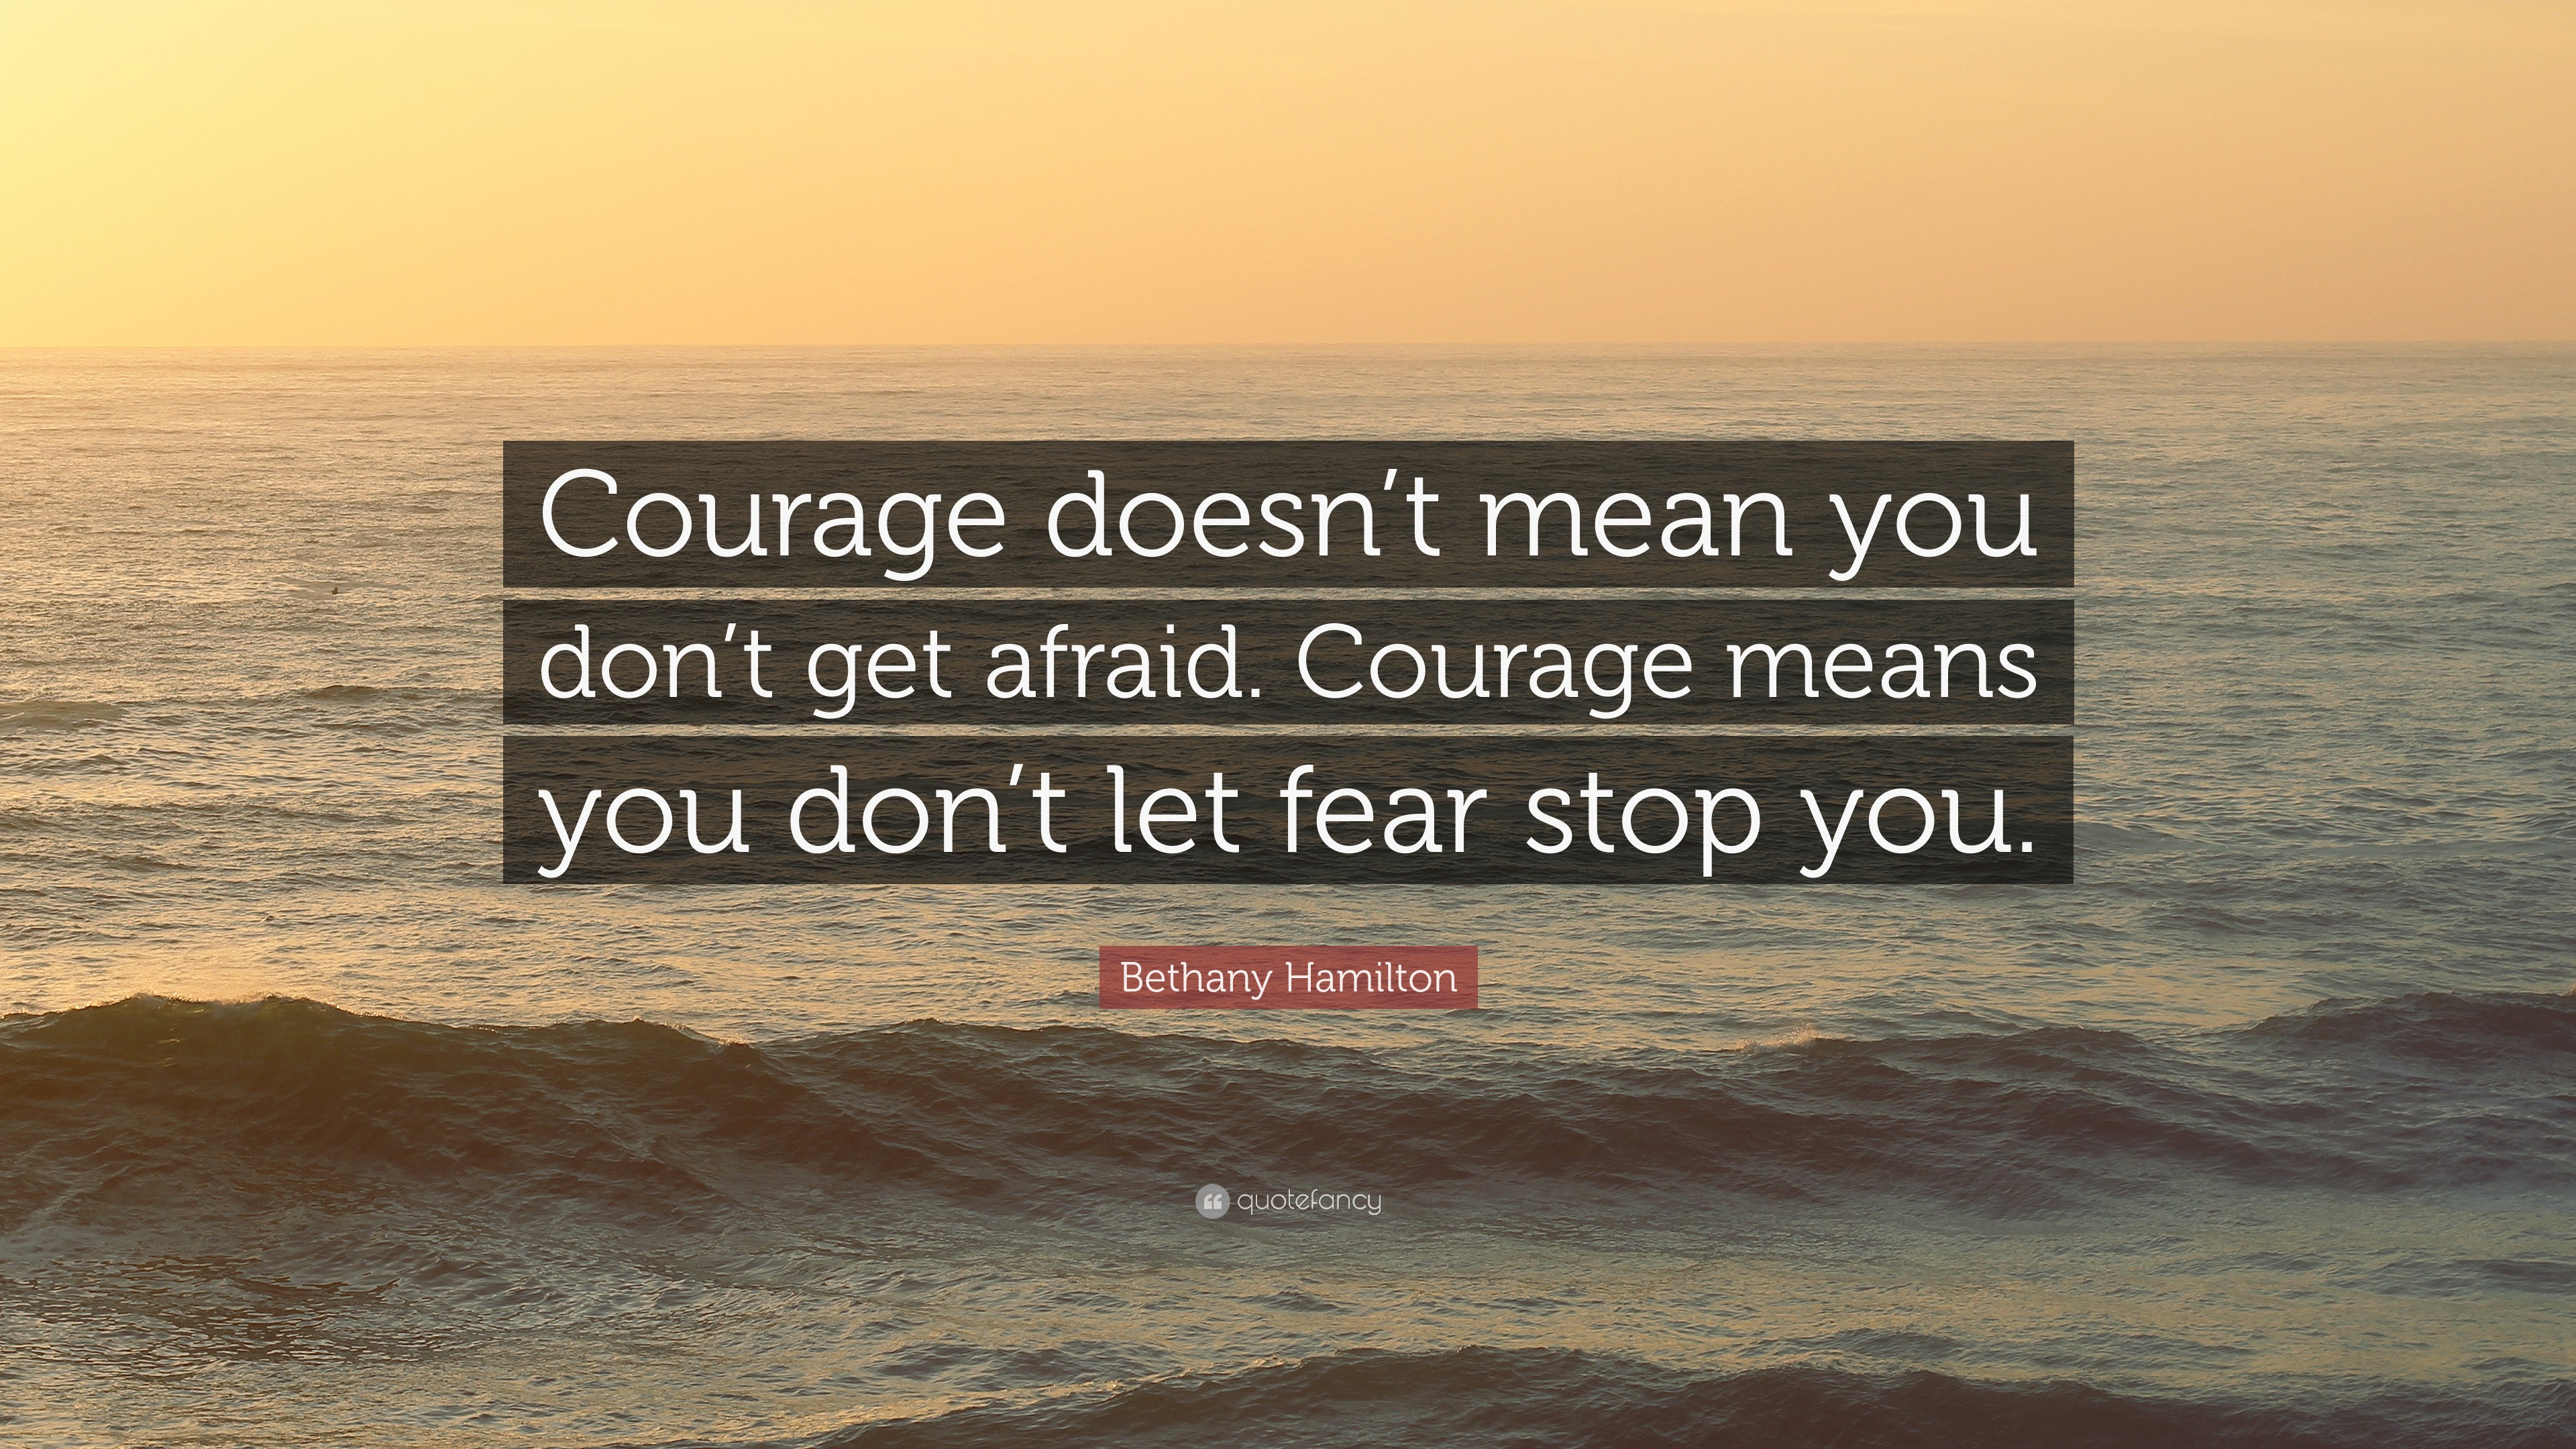 Bethany Hamilton Quote: “Courage doesn’t mean you don’t get afraid ...